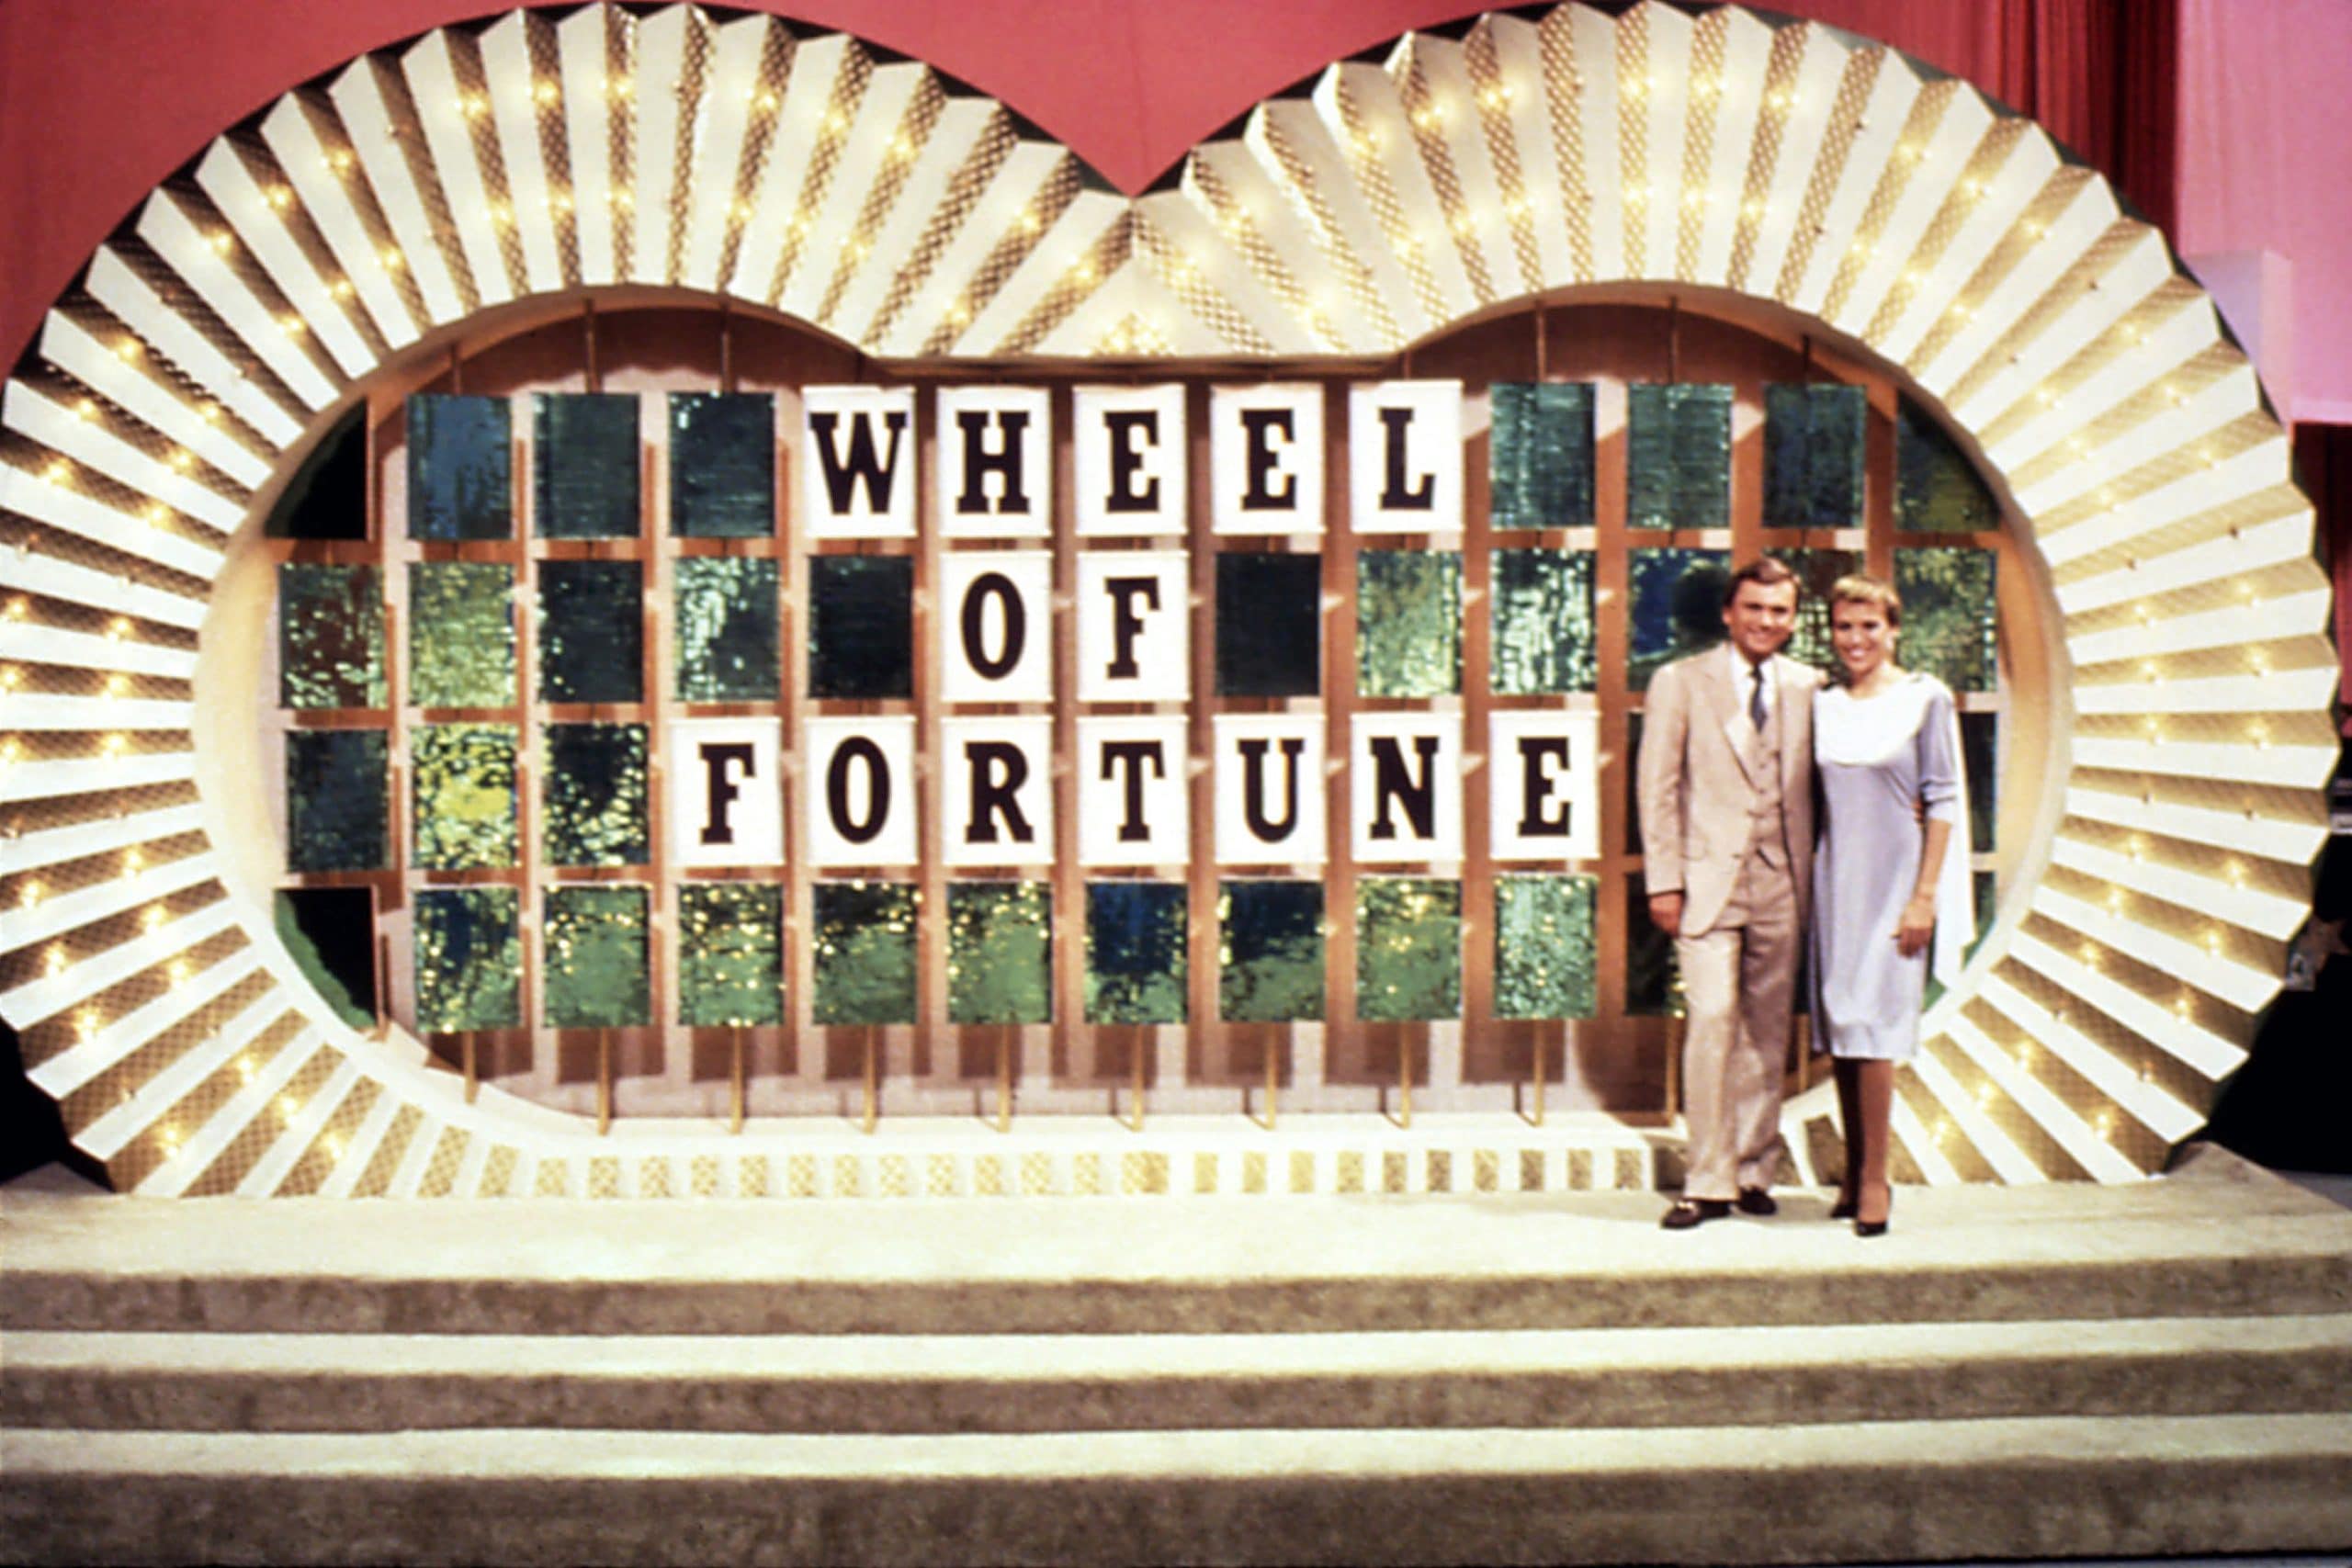 WHEEL OF FORTUNE, (from left): host Pat Sajak, co-host Vanna White, (ca. mid 1980s), 1975-